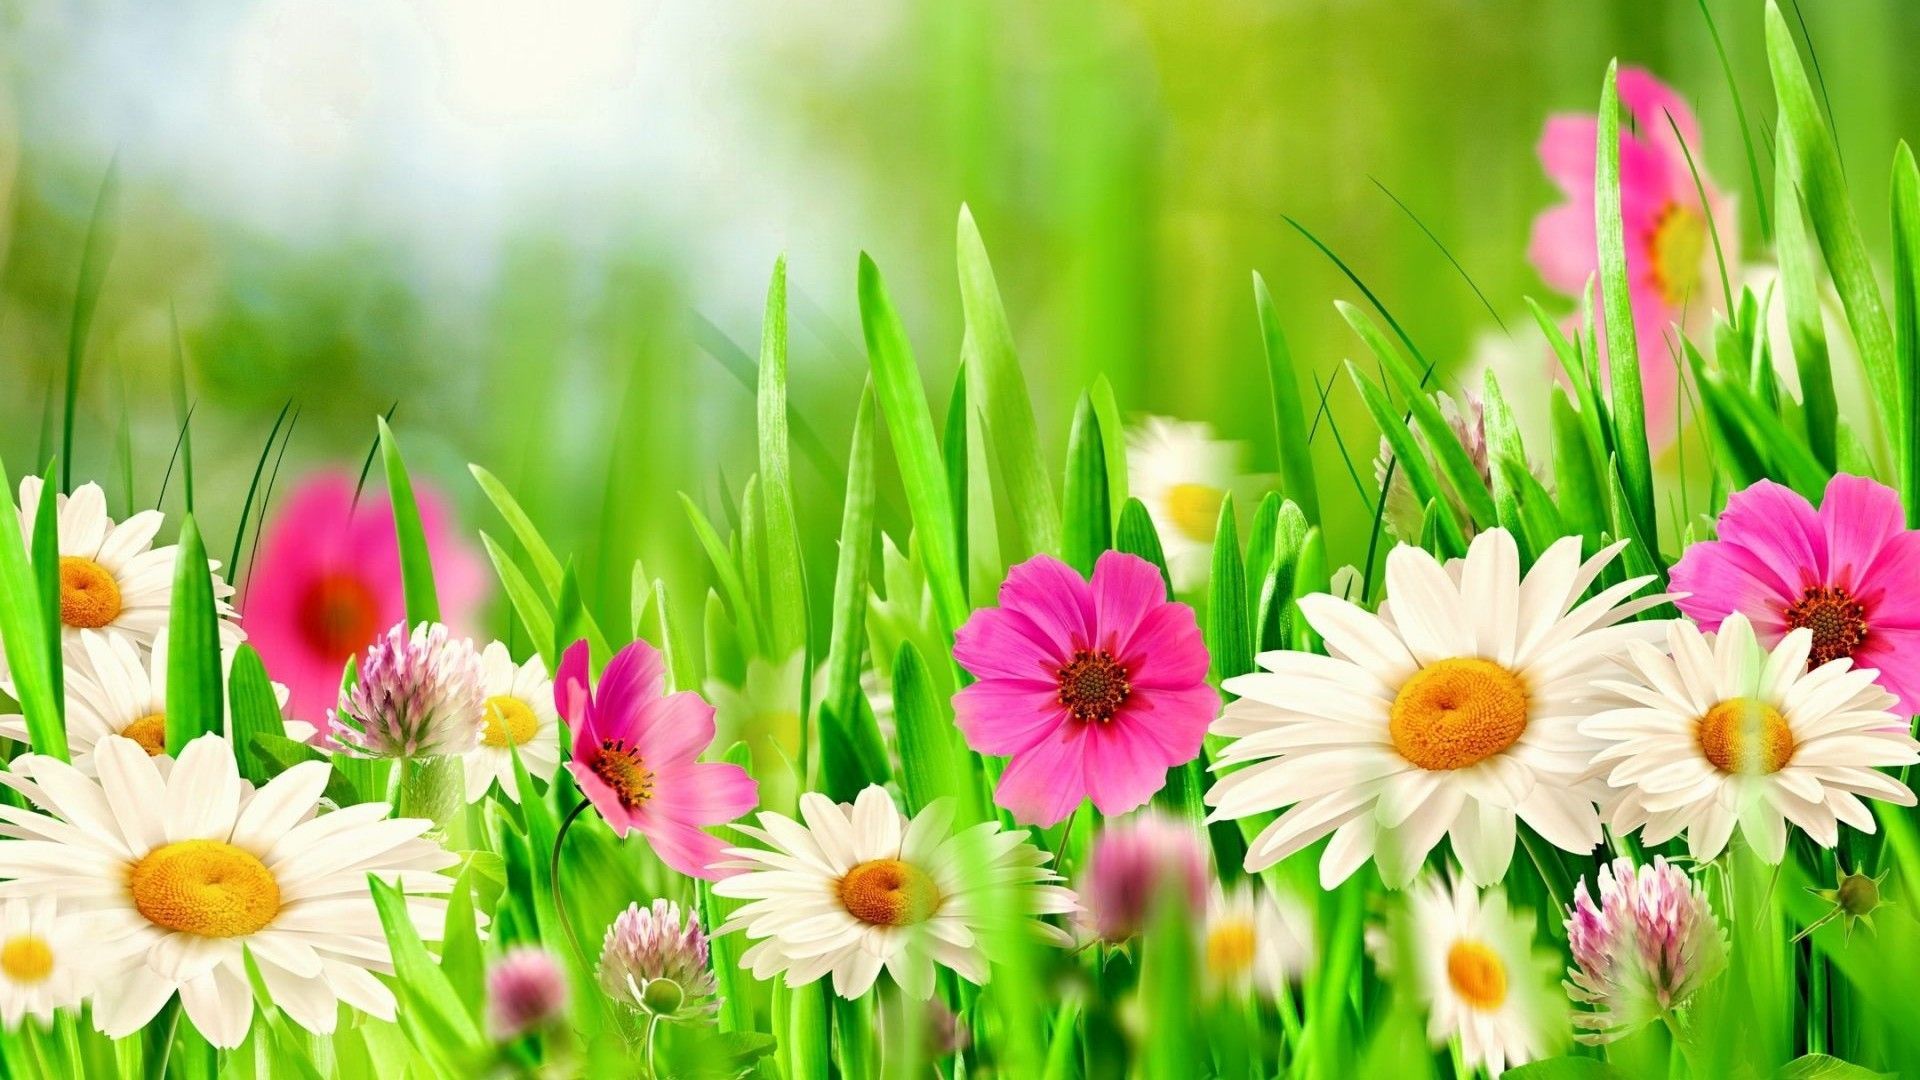 Wallpaper HD Beautiful Spring Live Wallpaper HD. Spring cover photo, Facebook cover, Easter wallpaper